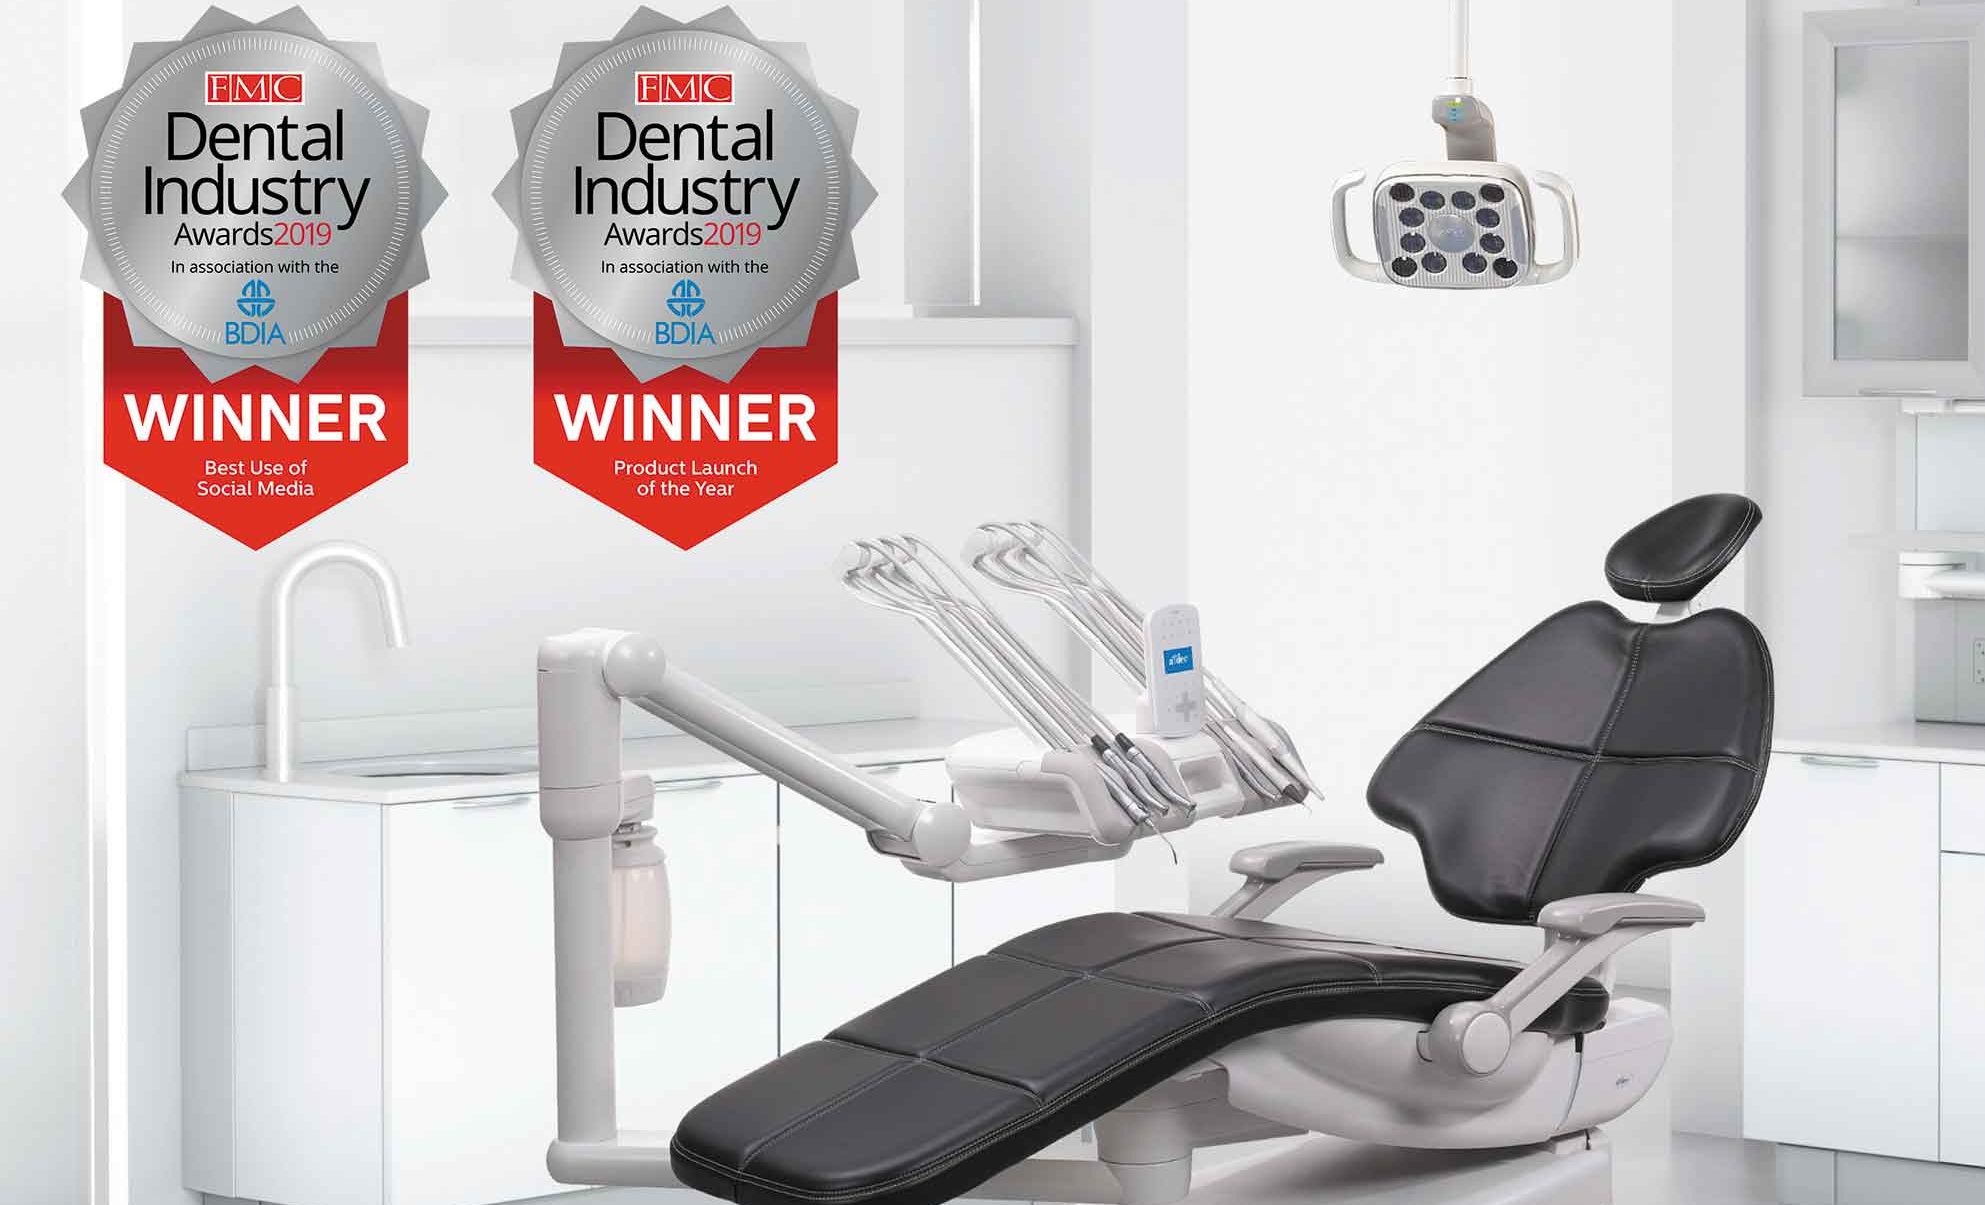 Nick Olive gives his tips on caring for your dental chair